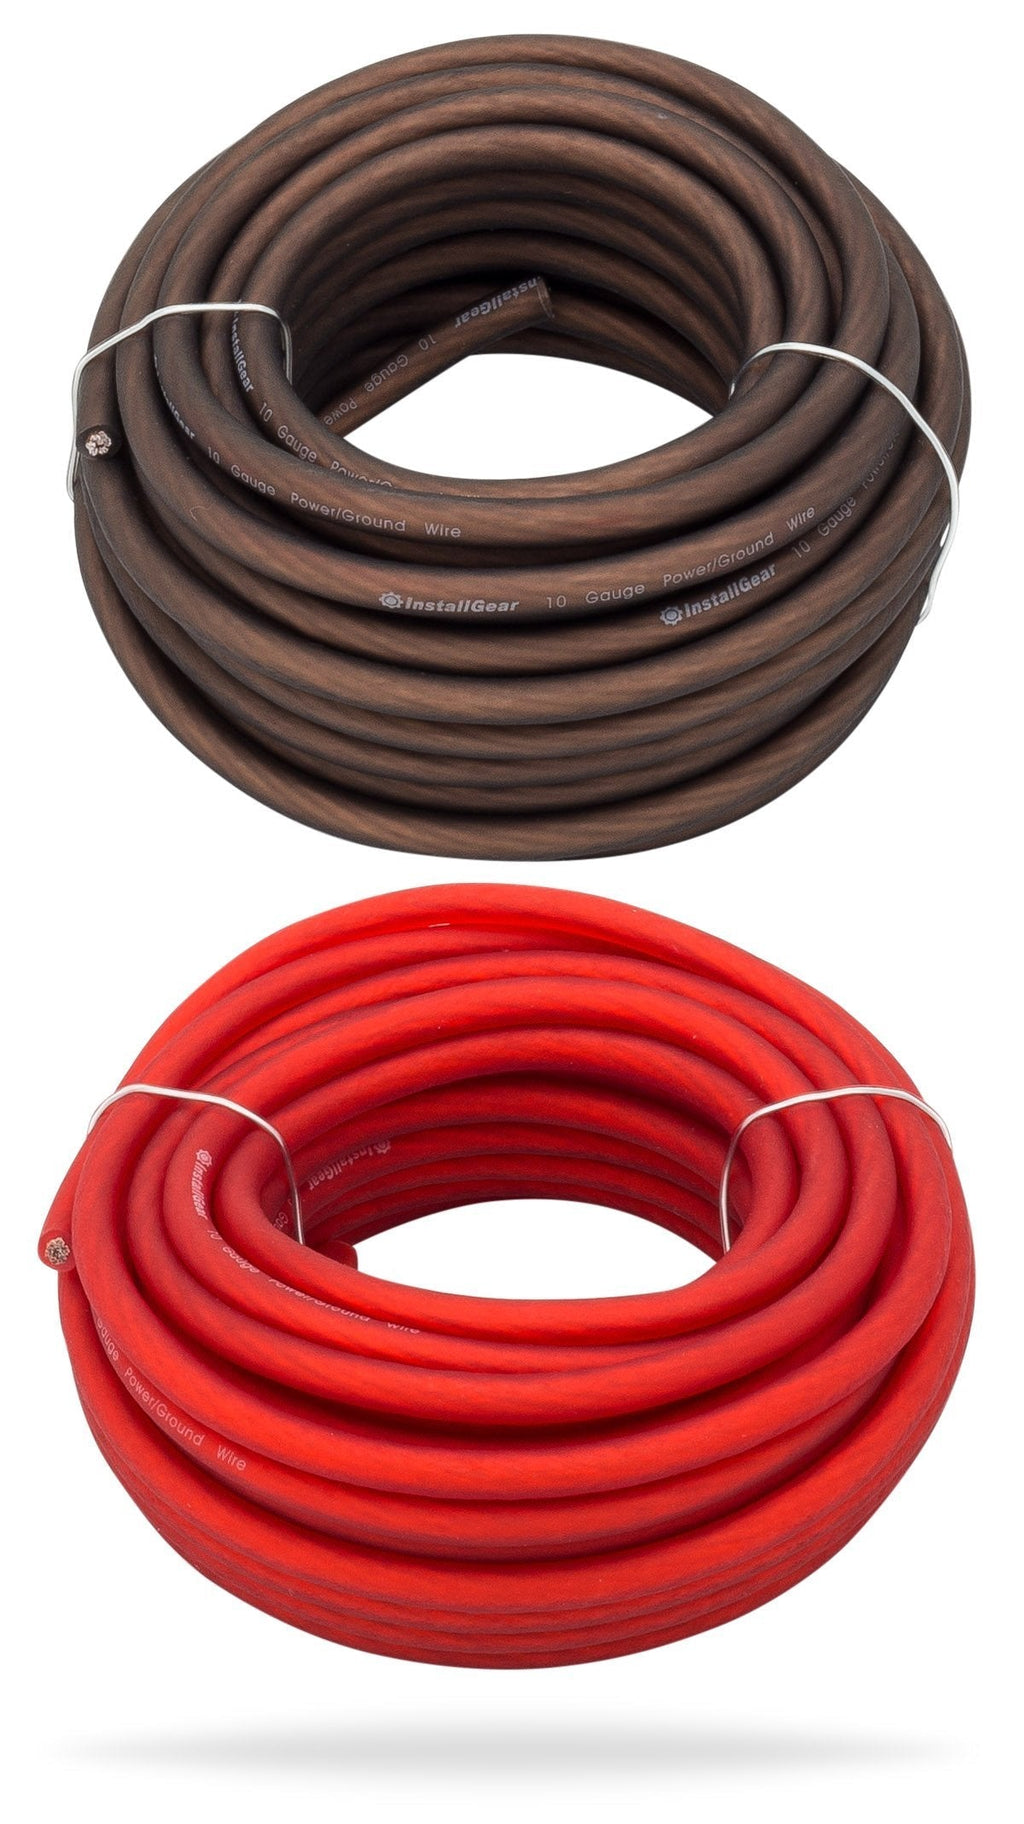  [AUSTRALIA] - InstallGear 10 Gauge 25ft Black and 25ft Red Power/Ground Wire True Spec and Soft Touch Cable 10 Gauge (25ft) Red + Black